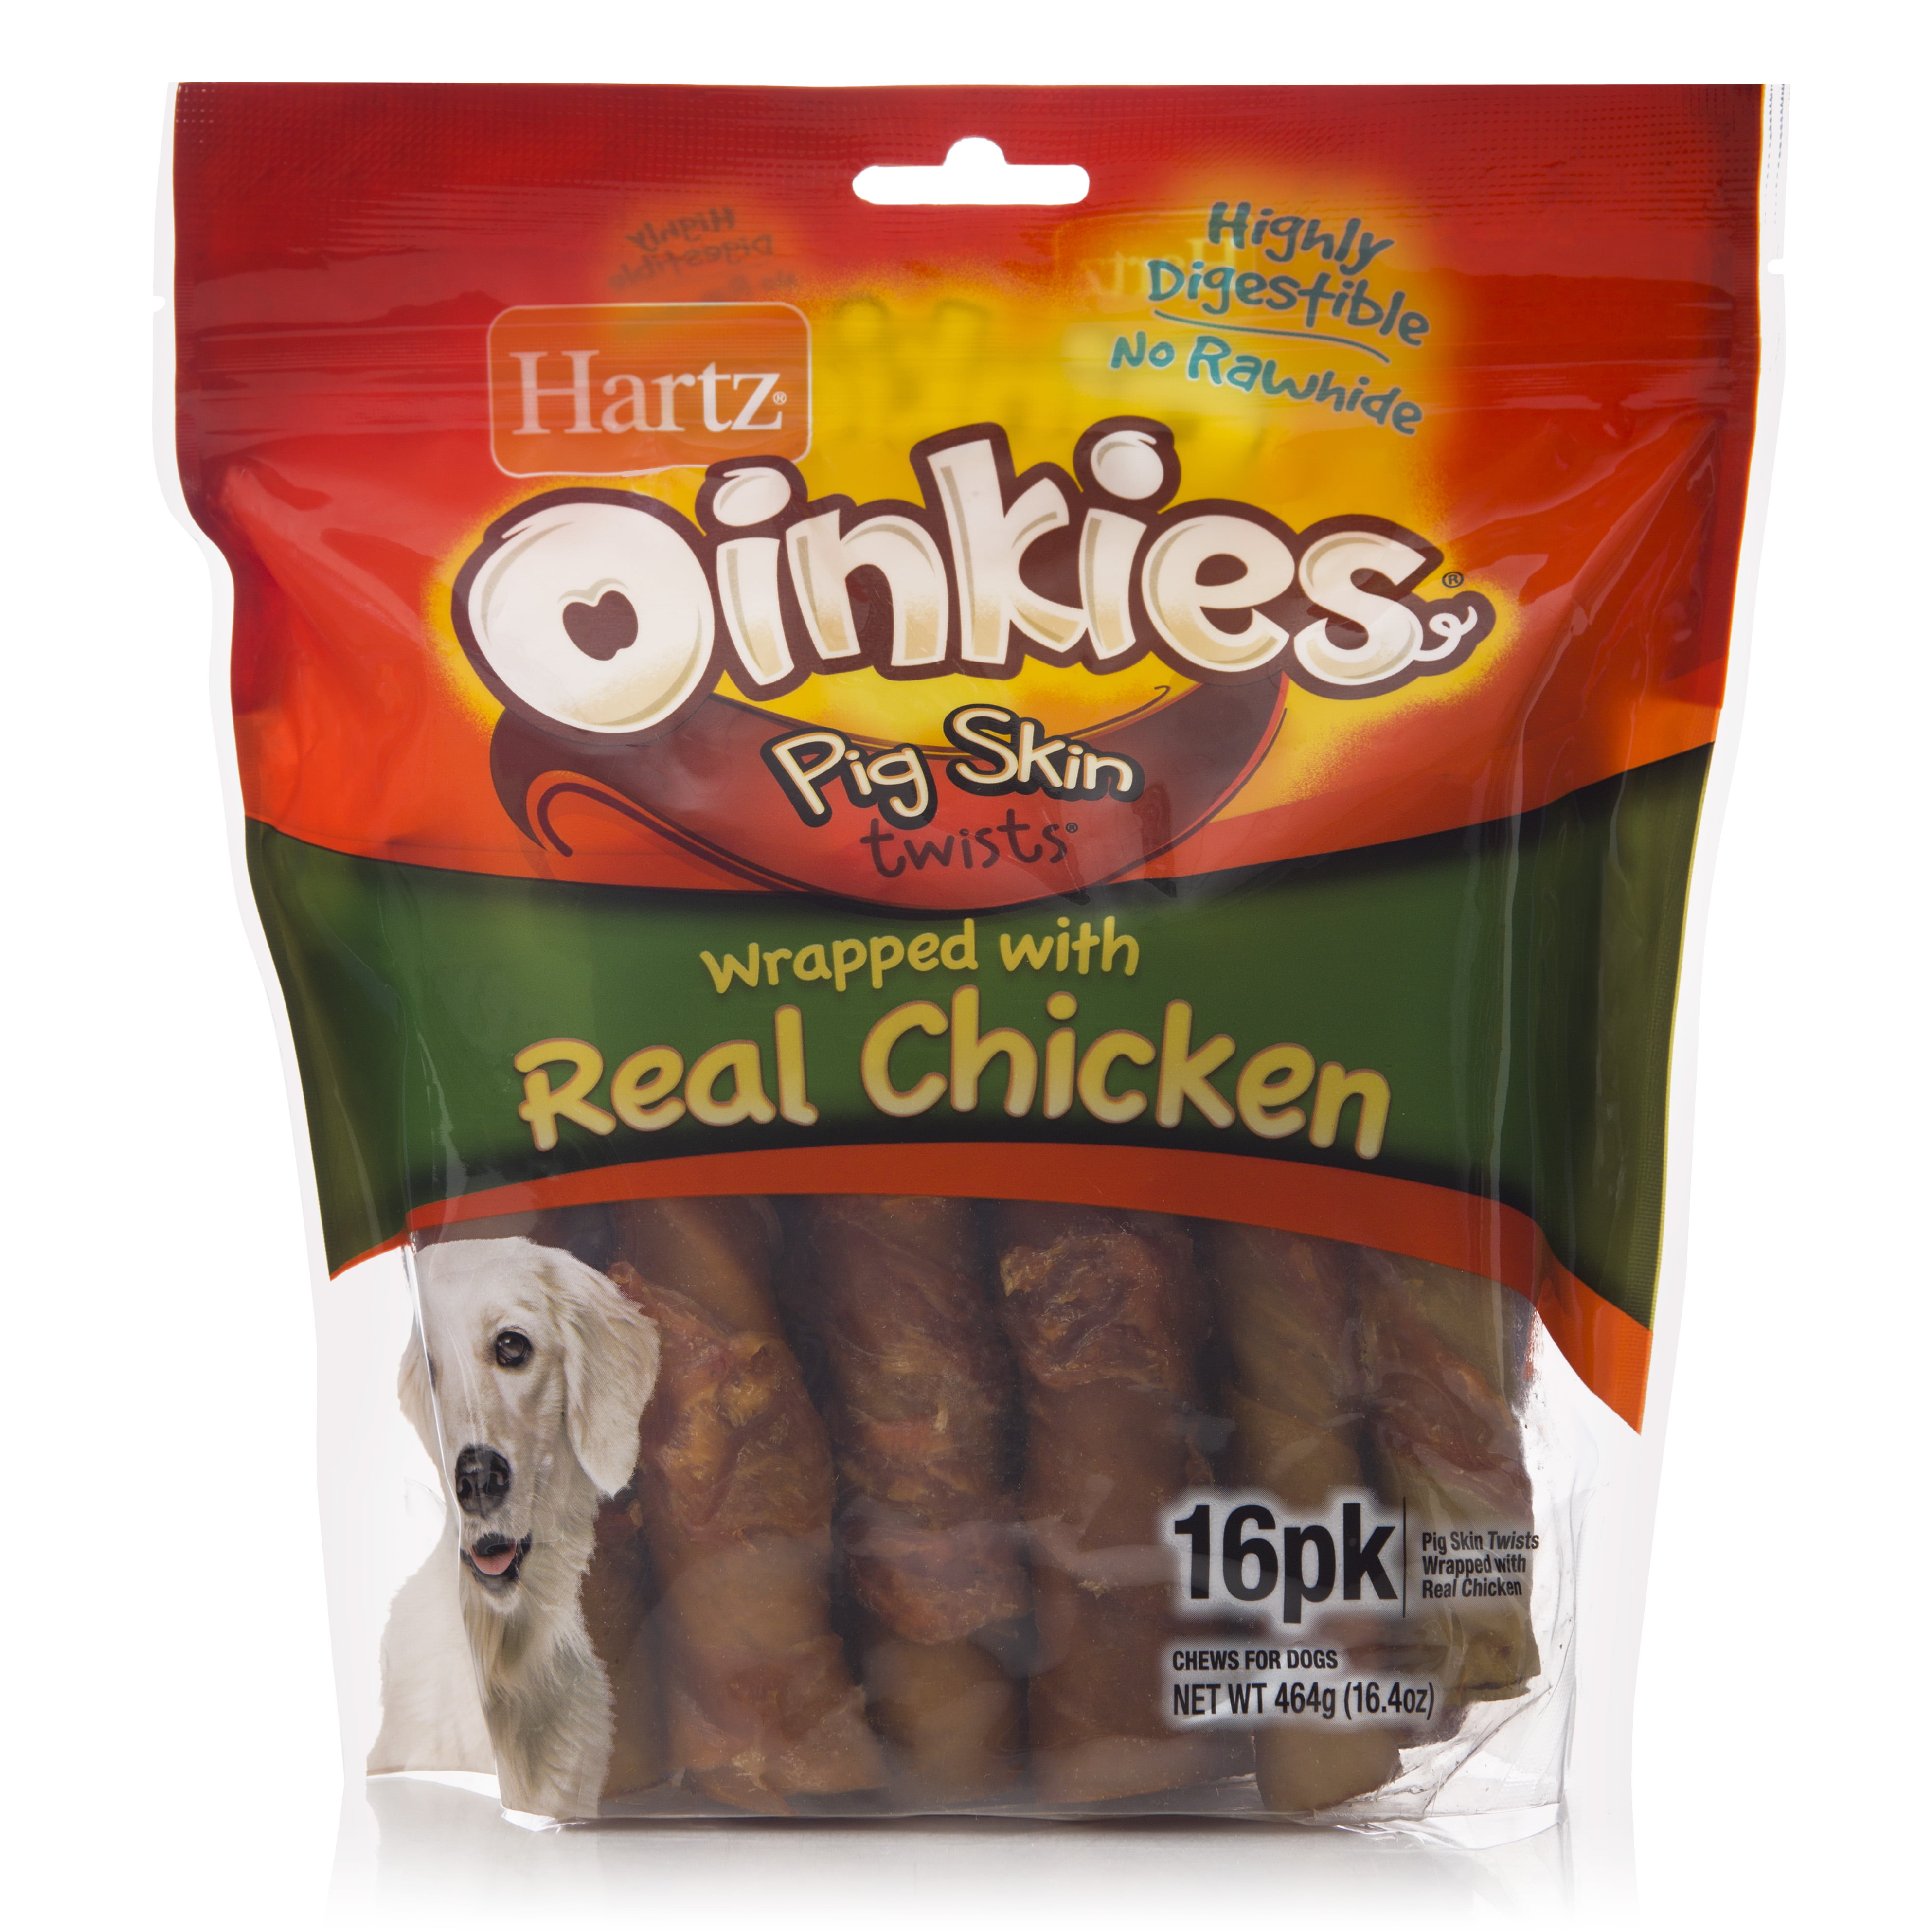 Hartz Oinkies Rawhide-Free Chicken Wrapped Smoked Pig Skin Twists Dog Treats, 16.4oz (16 Count)